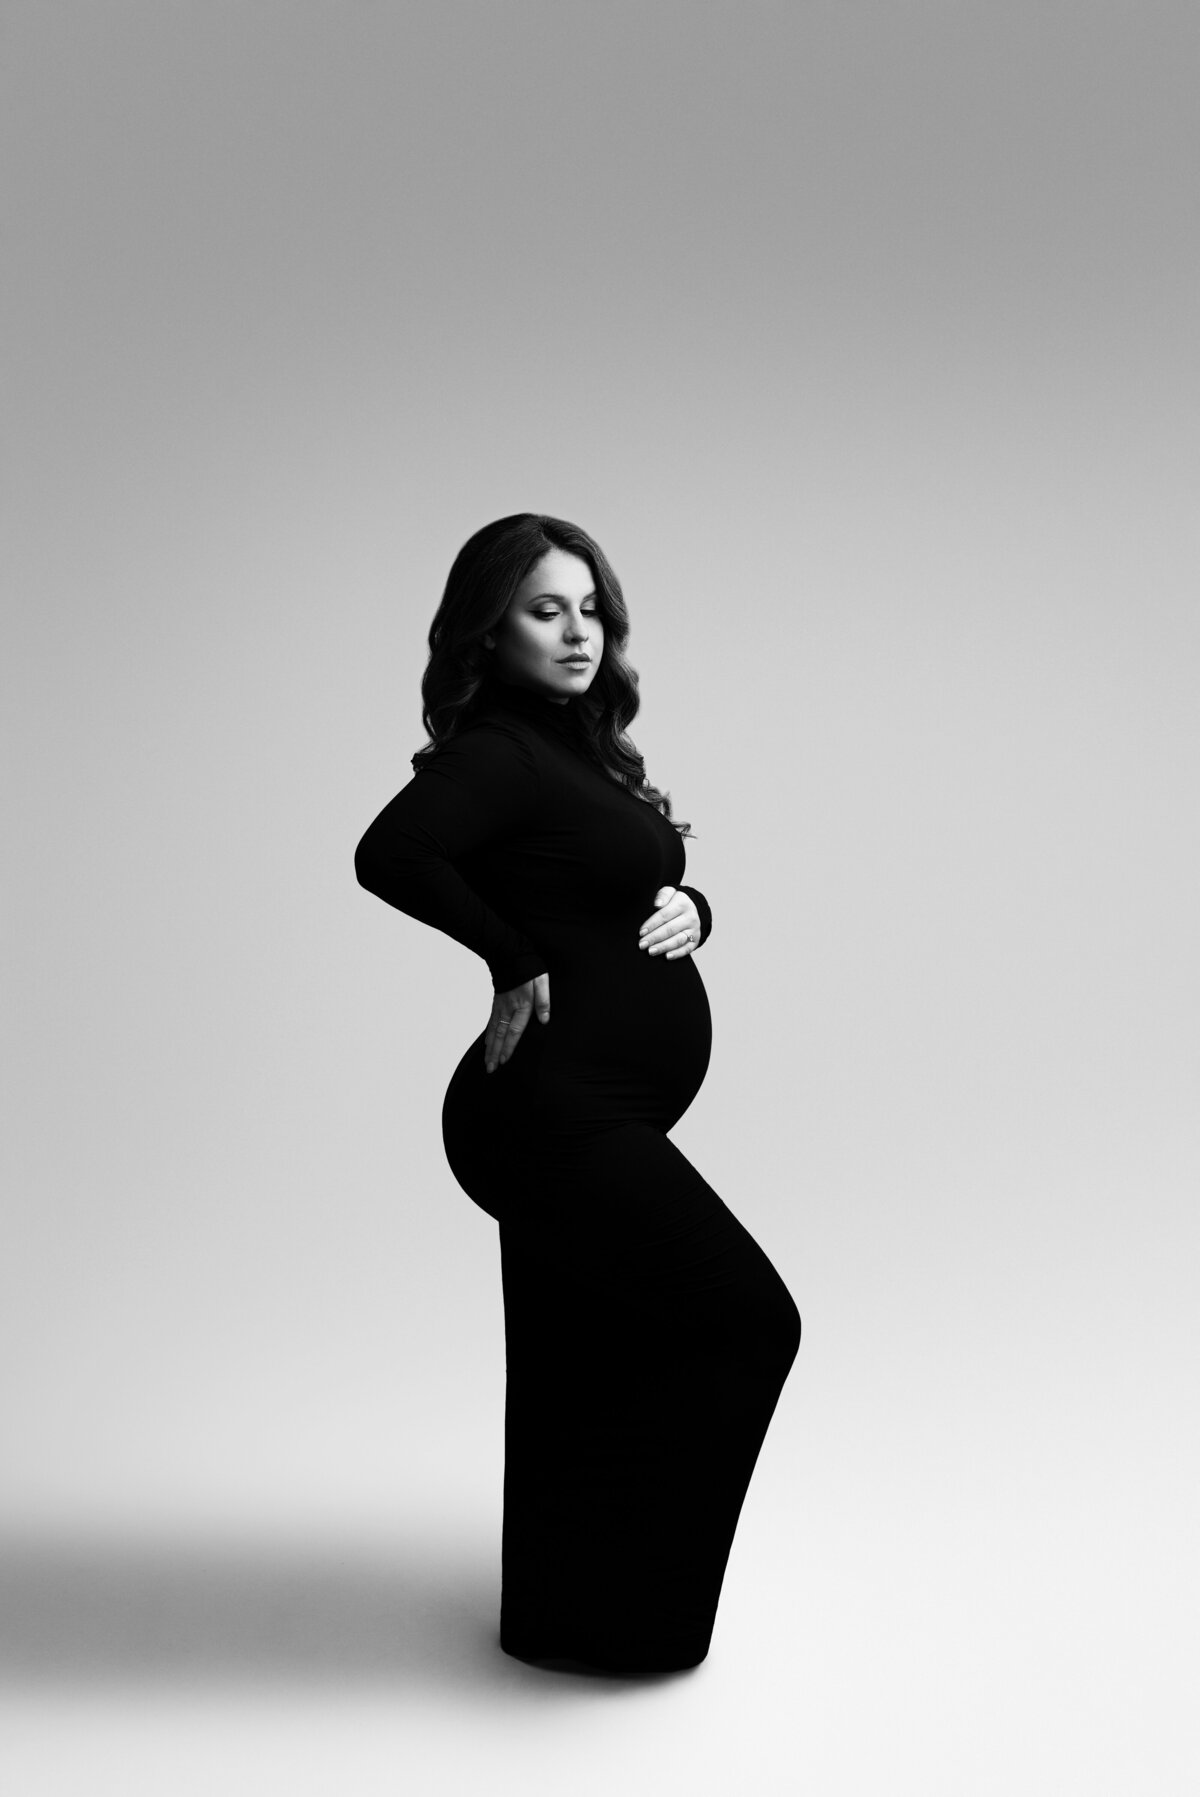 In this fine art maternity photo, Philadelphia Main Line's premier maternity photographer, Katie Marshall, captures a serene moment. The woman, dressed elegantly in a floor-length long-sleeve body-con dress, poses with her front leg gracefully bent. Her forehand cradles the small of her back, while her other hand gently rests atop her baby bump. With closed eyes, her face is angled tenderly toward her bump, creating a beautifully emotive and timeless composition